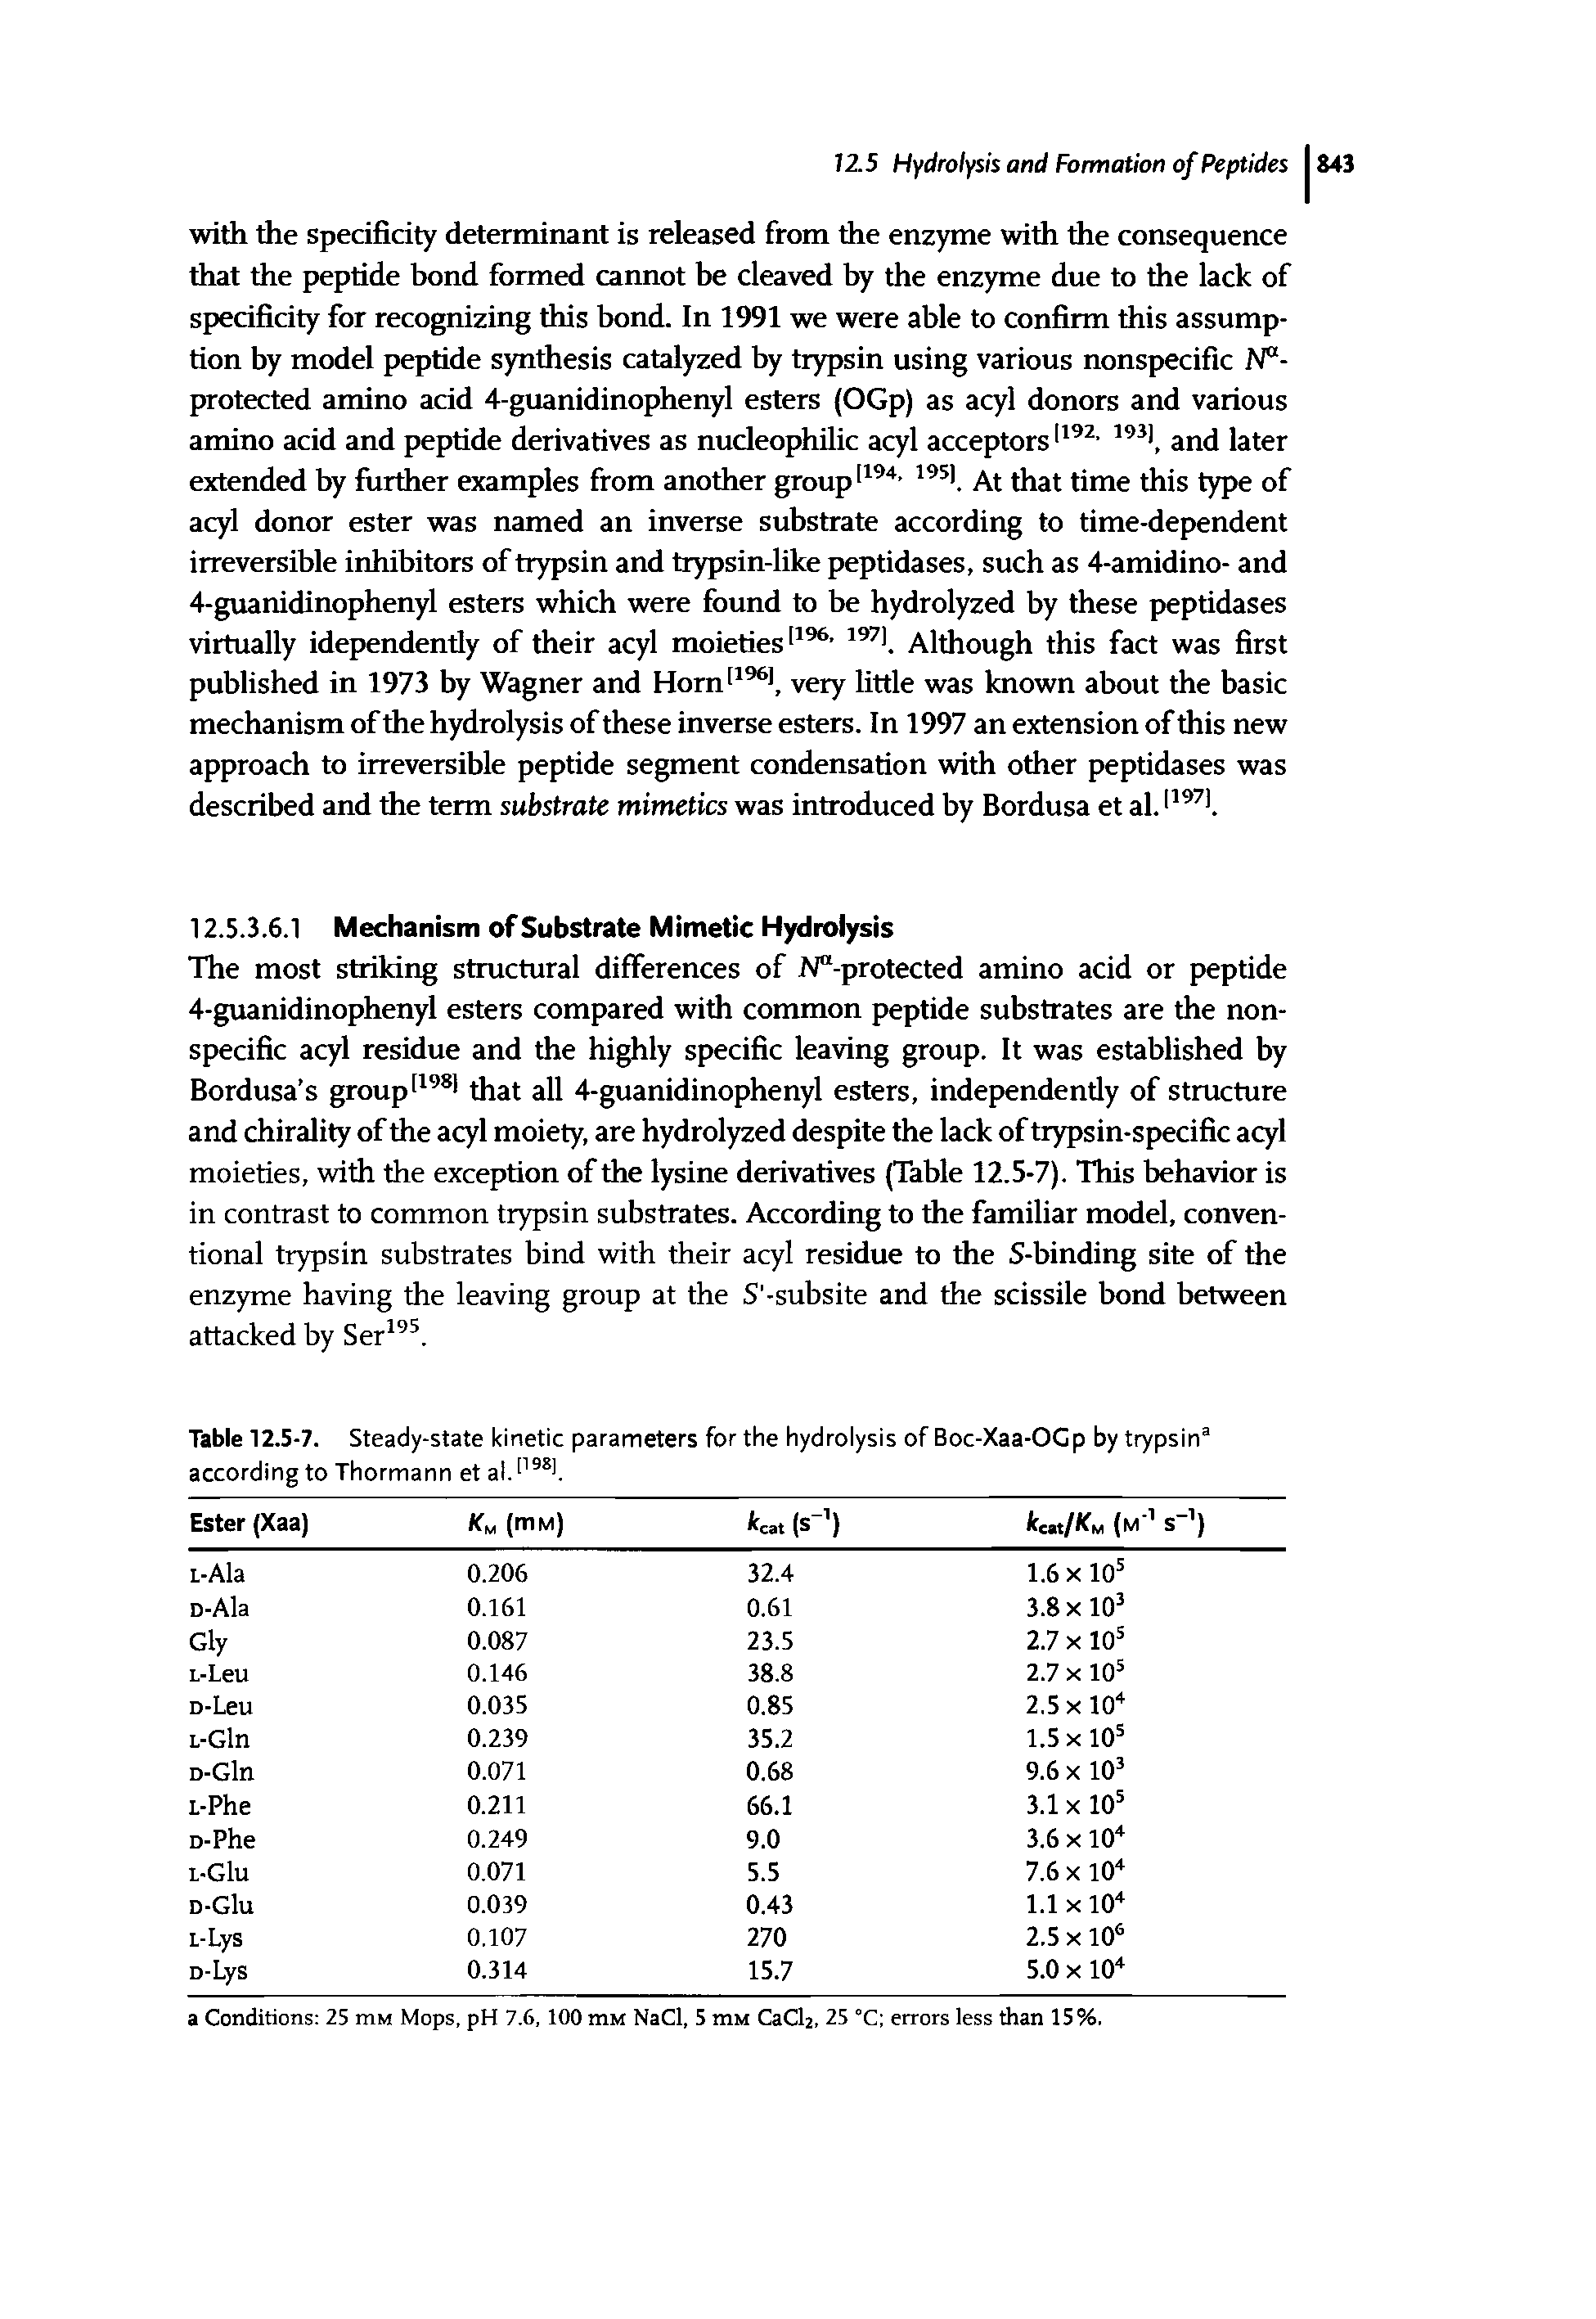 Table 12.5-7. Steady-state kinetic parameters for the hydrolysis of Boc-Xaa-OCp by trypsin according to Thormann et ai.[198].